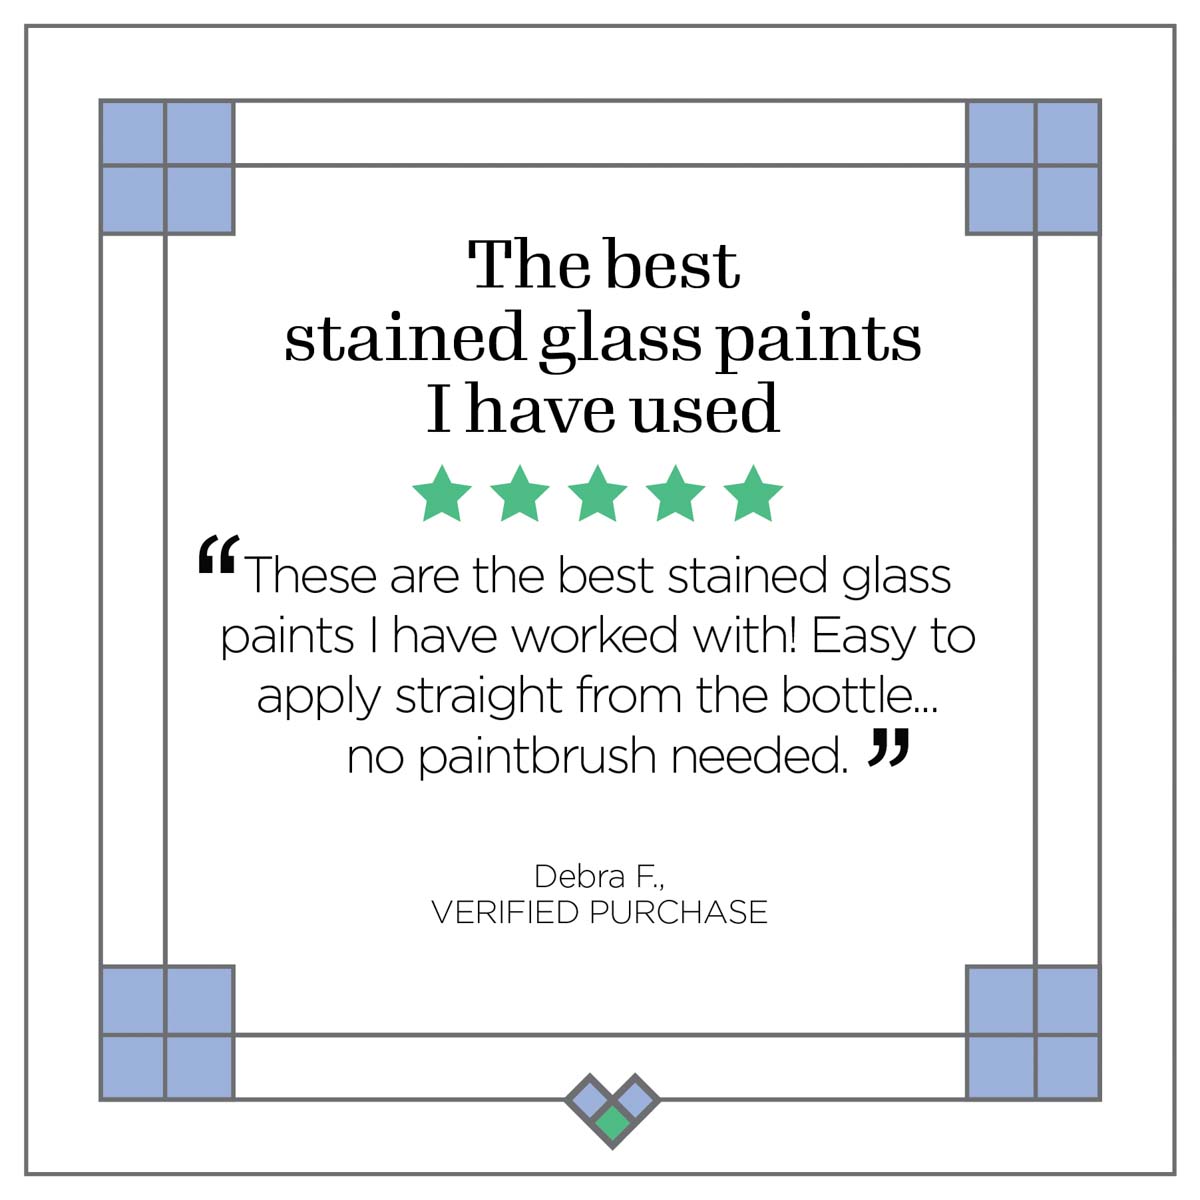 Gallery Glass ® Stained Glass Effect Paint - Aqua, 2 oz. - 19781